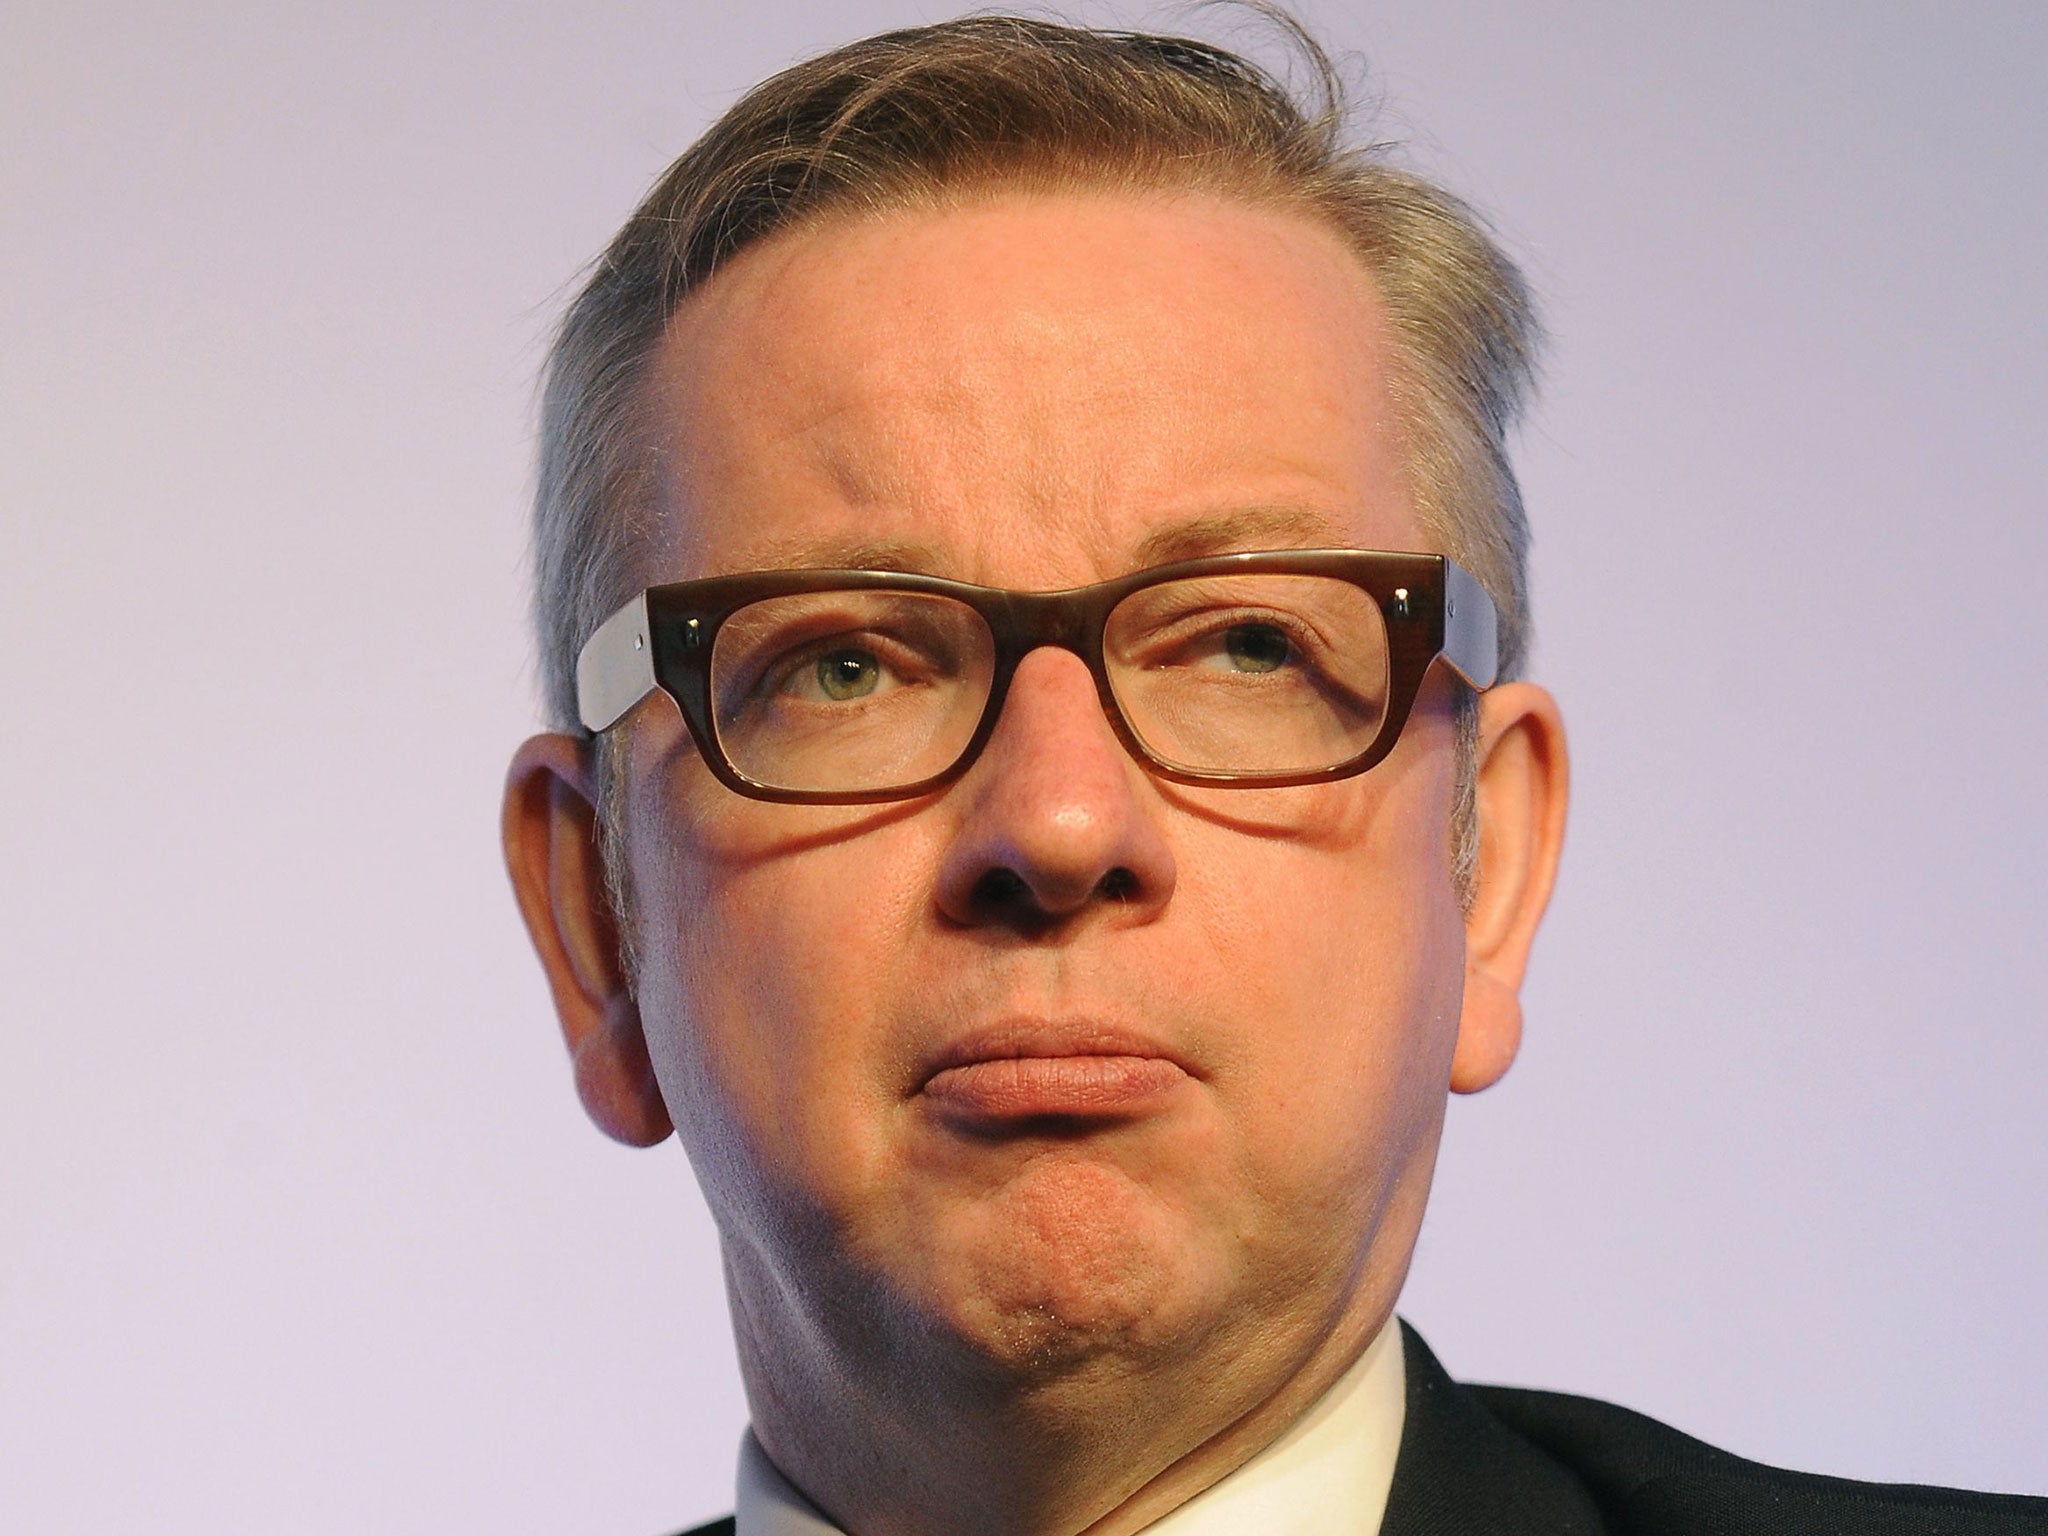 Justice Secretary Michael Gove is government head of the British legal system